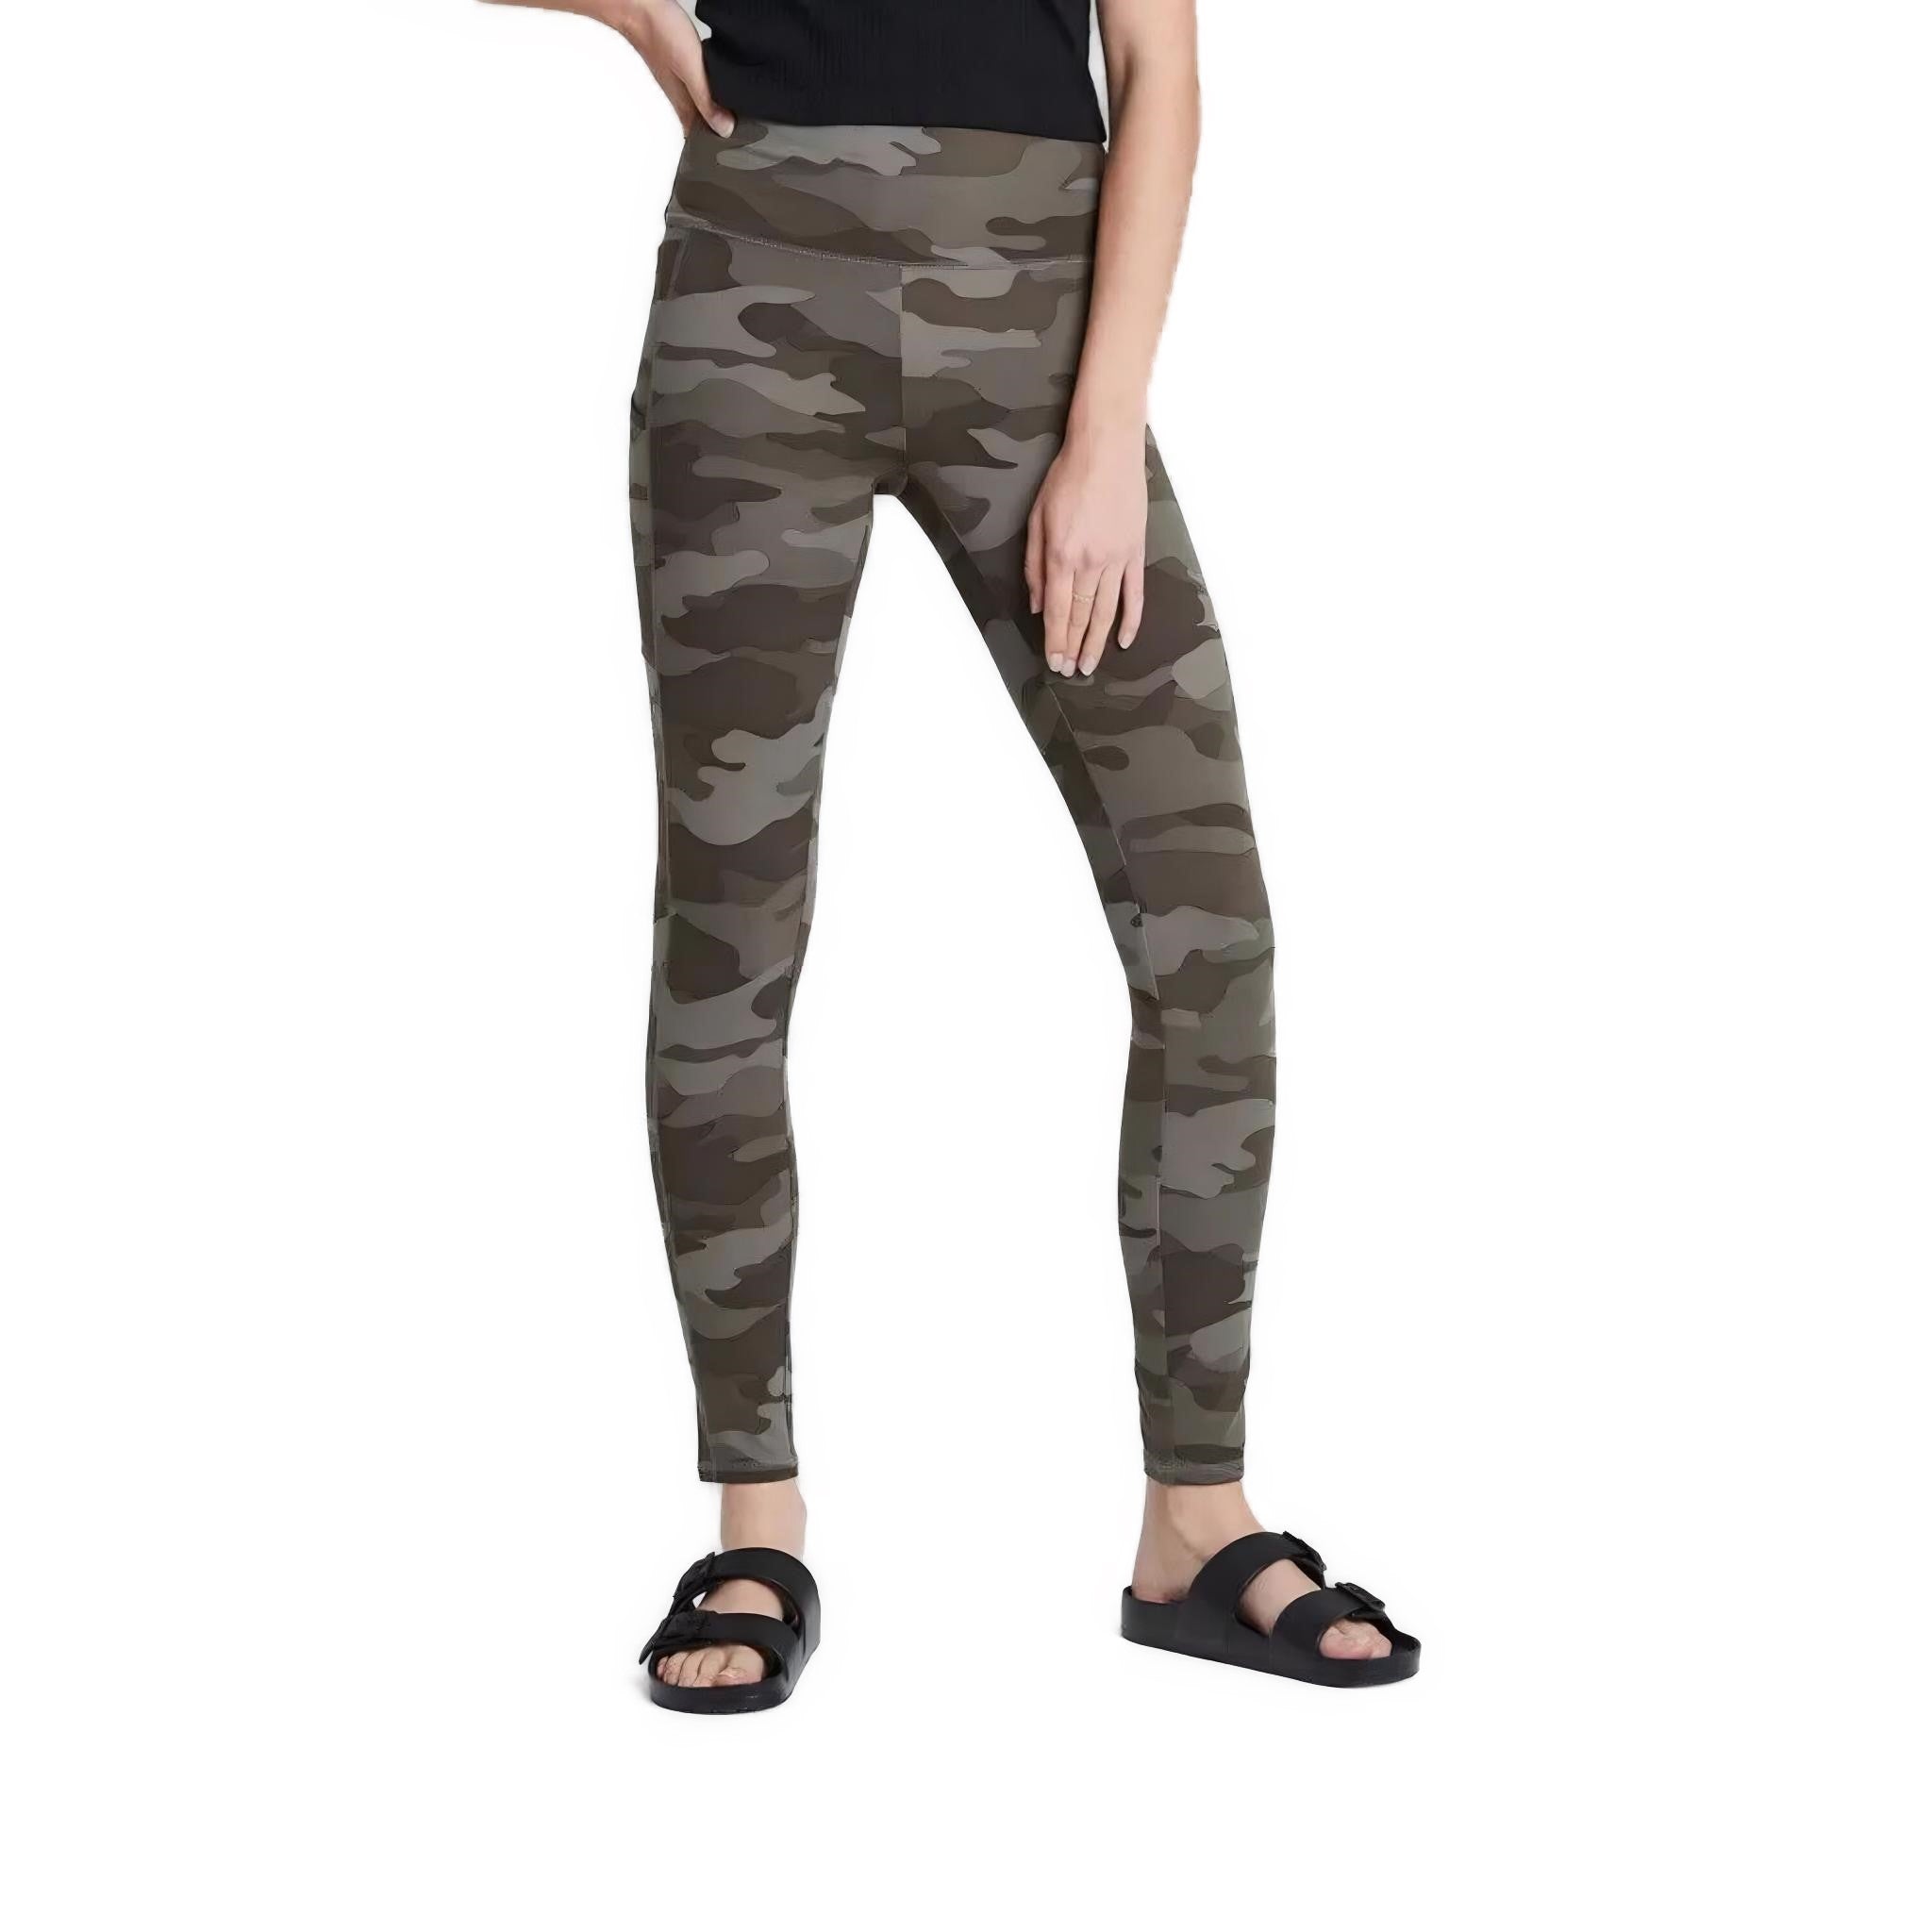 Wild Fable Women's Camo Leggings With Pockets Green Size M